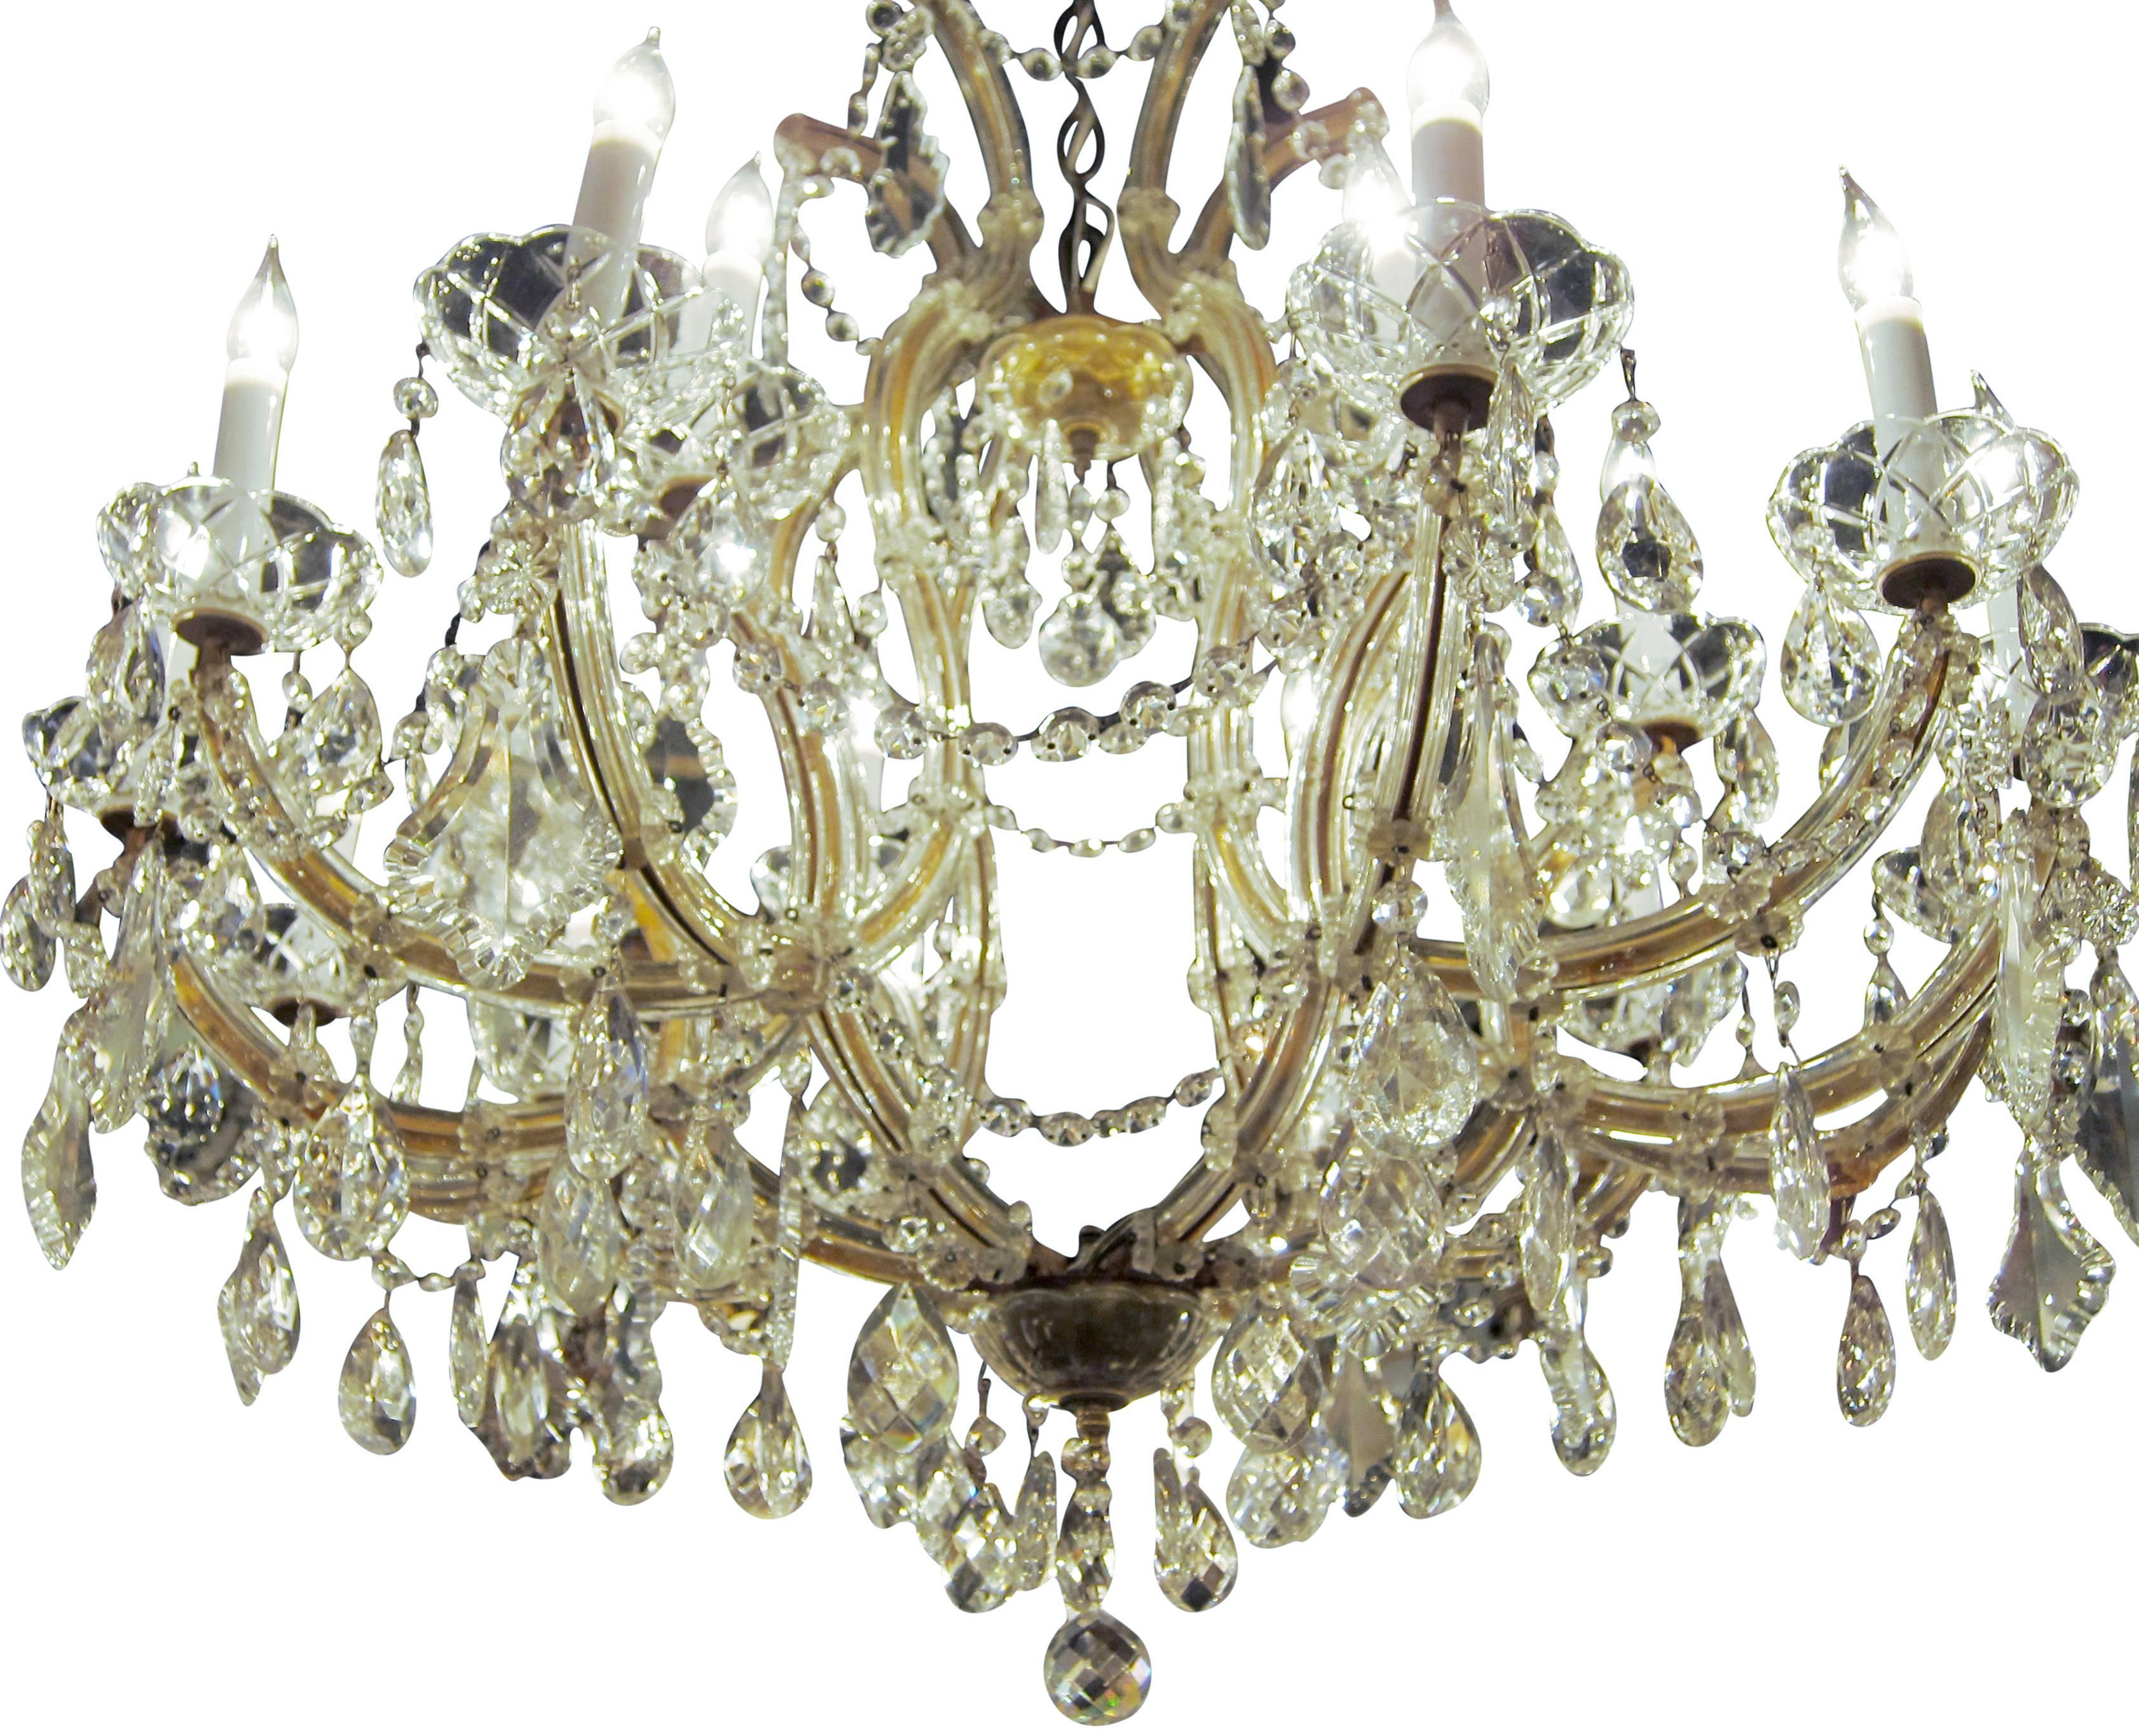 1940s Marie Therese style large crystal chandelier with 18 lights. This can be seen at our 2420 Broadway location on the upper west side in Manhattan.